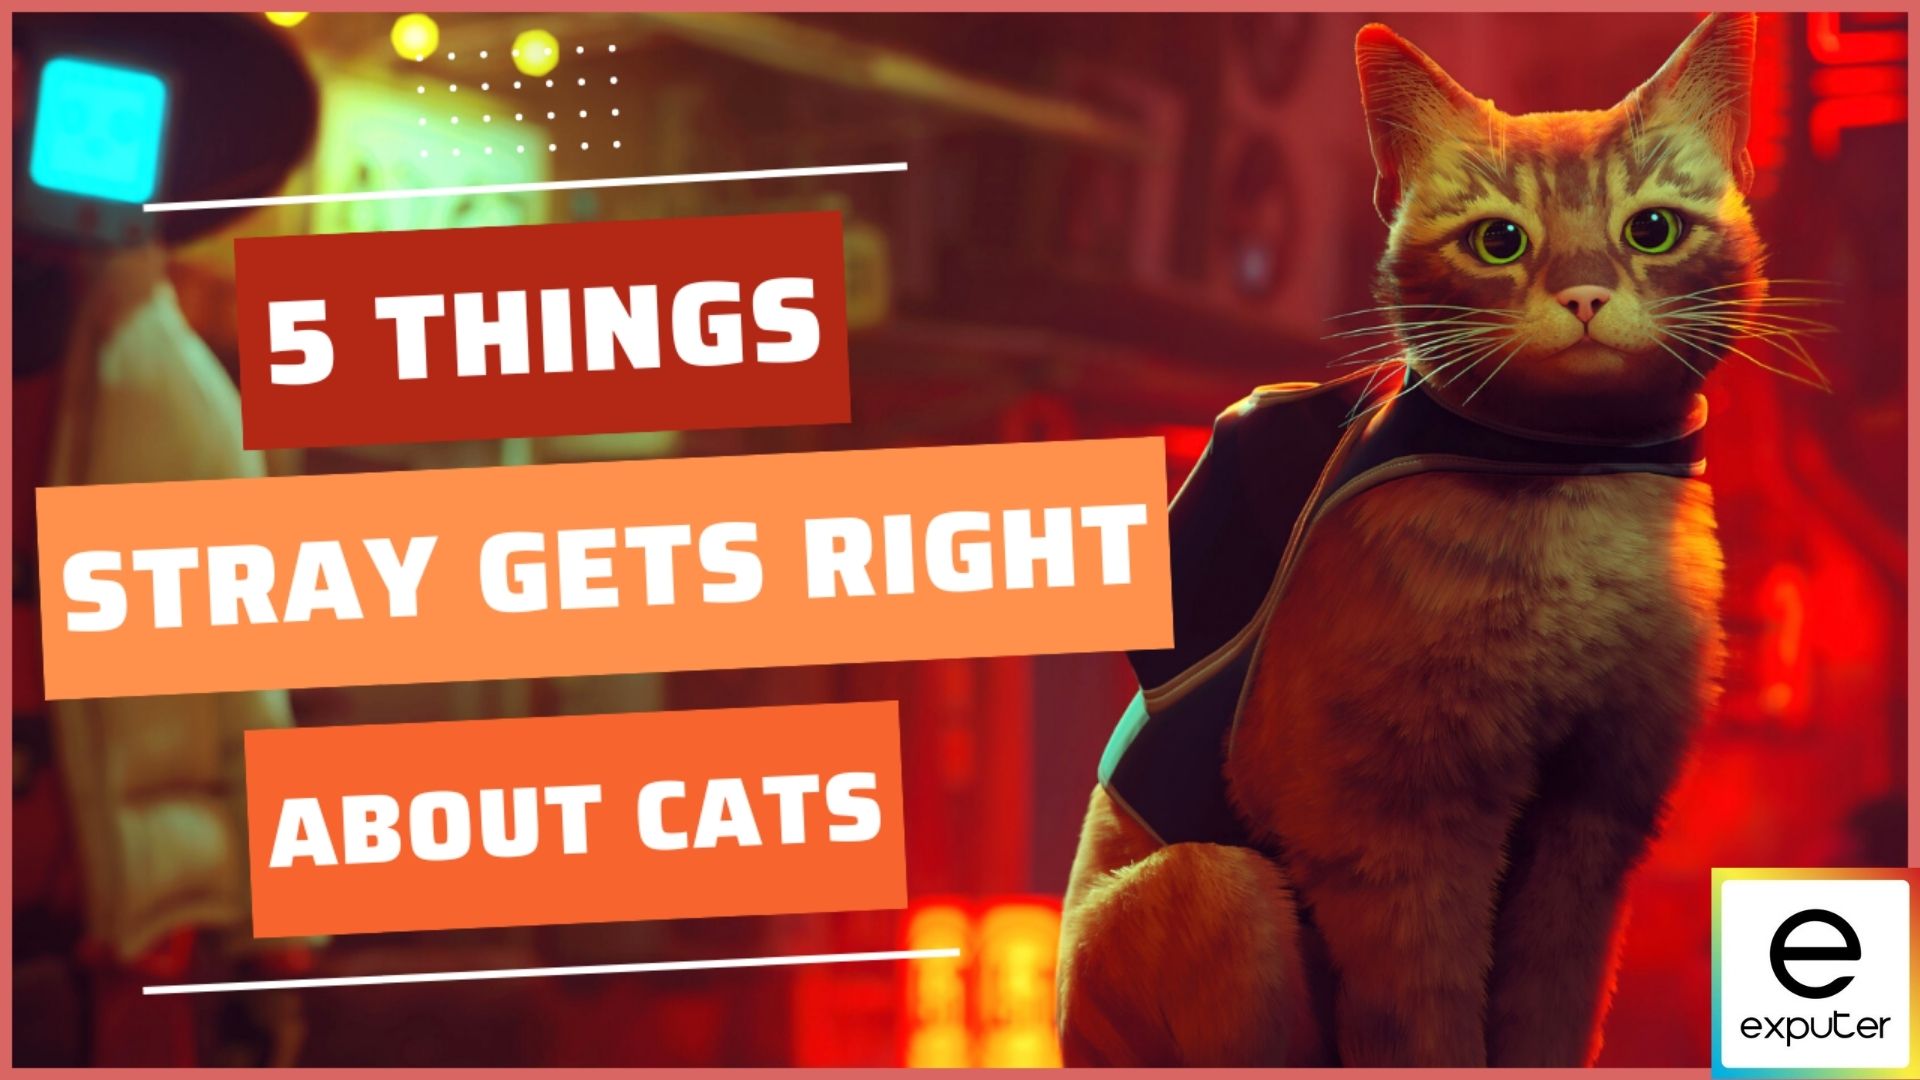 VIDEO: Top Things That 'Stray' Gets Right About Cats